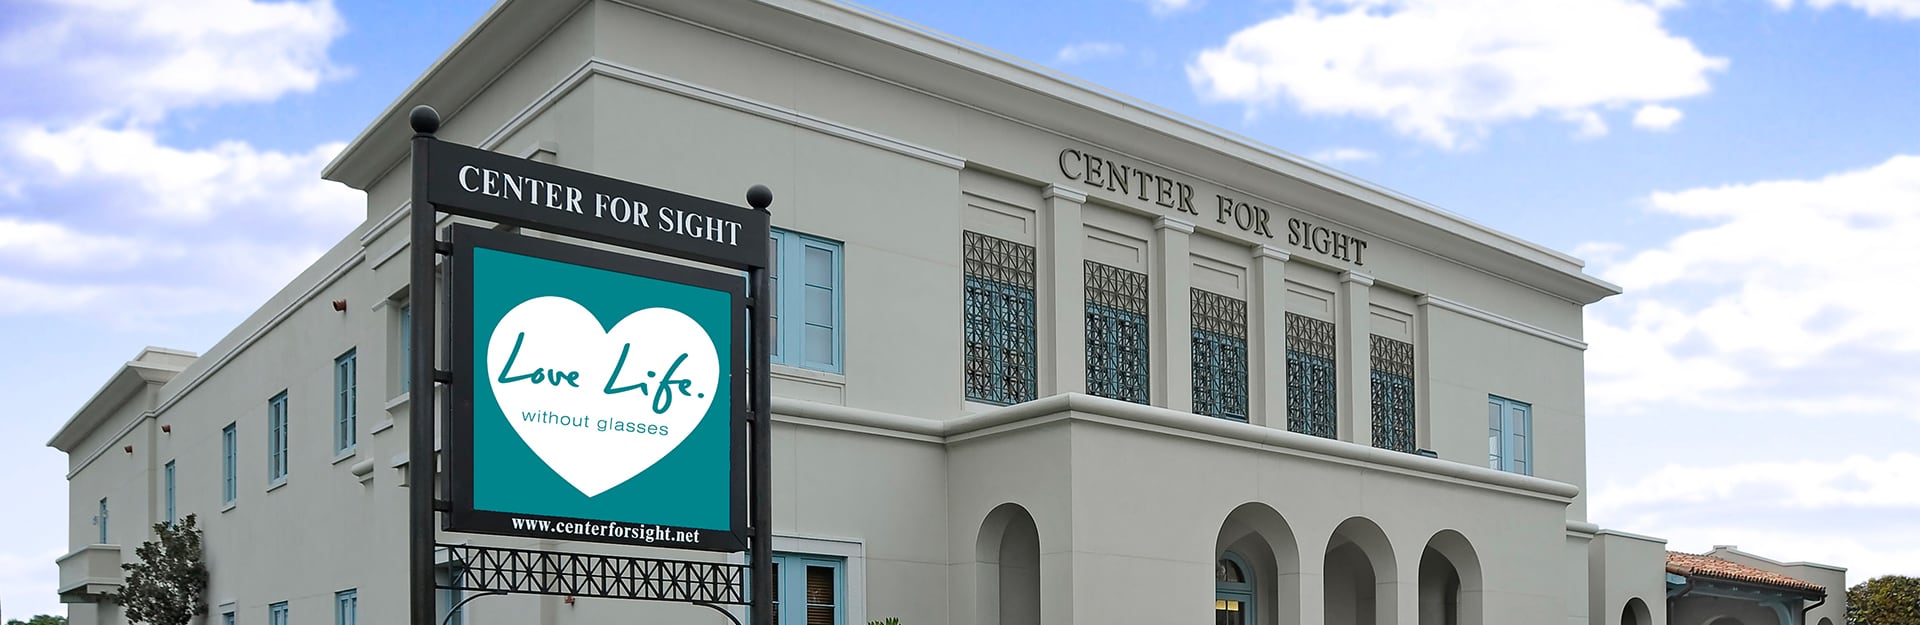 Center For Sight Love Life Without Glasses